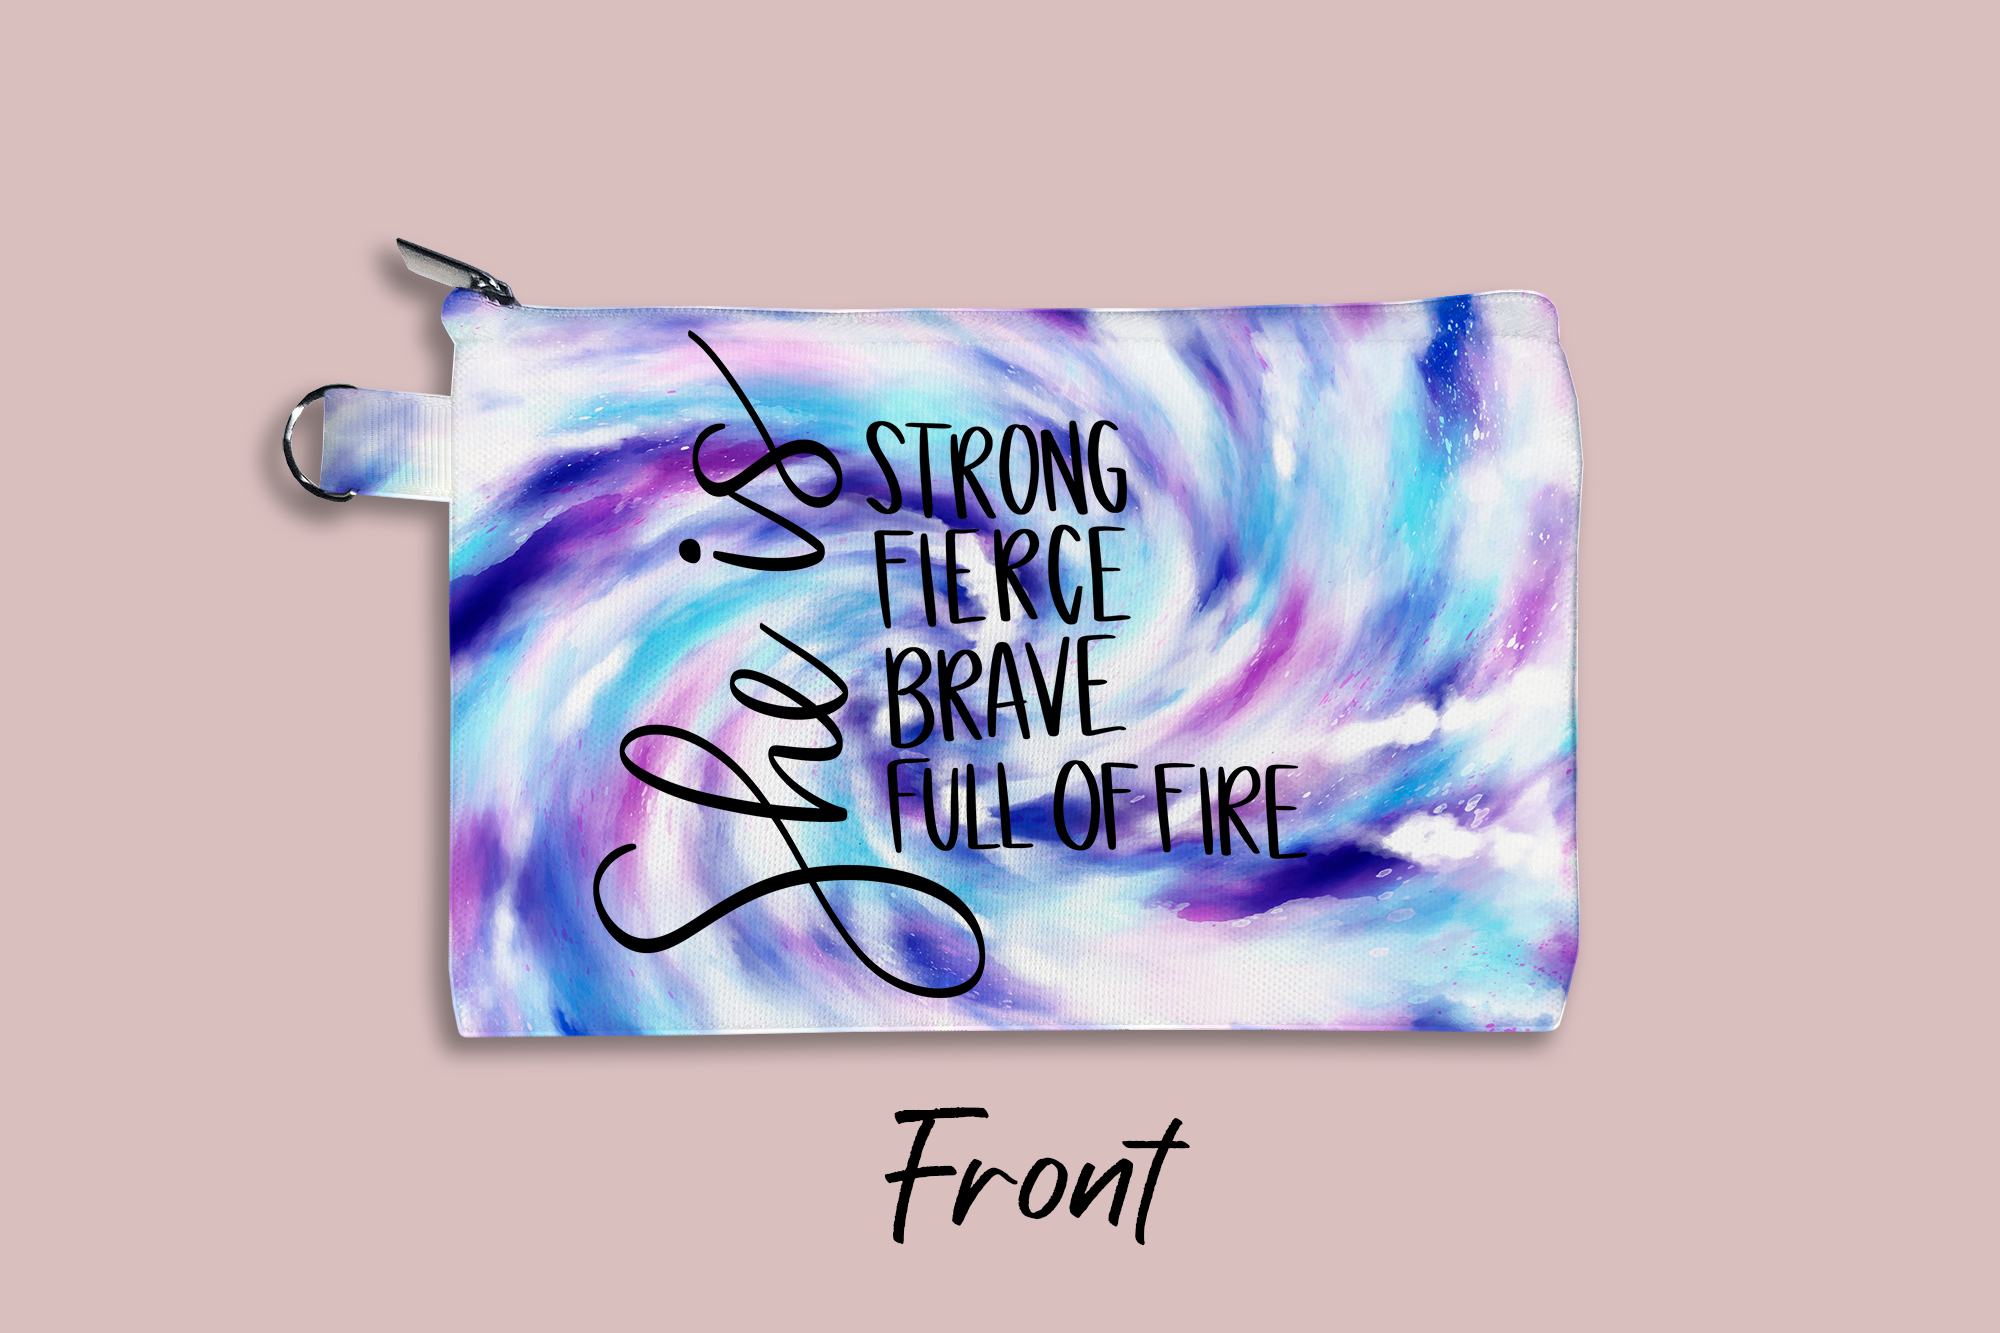 She is Strong Fierce Brave Full of Fire Tie-Dye Personalized Cosmetic Bag